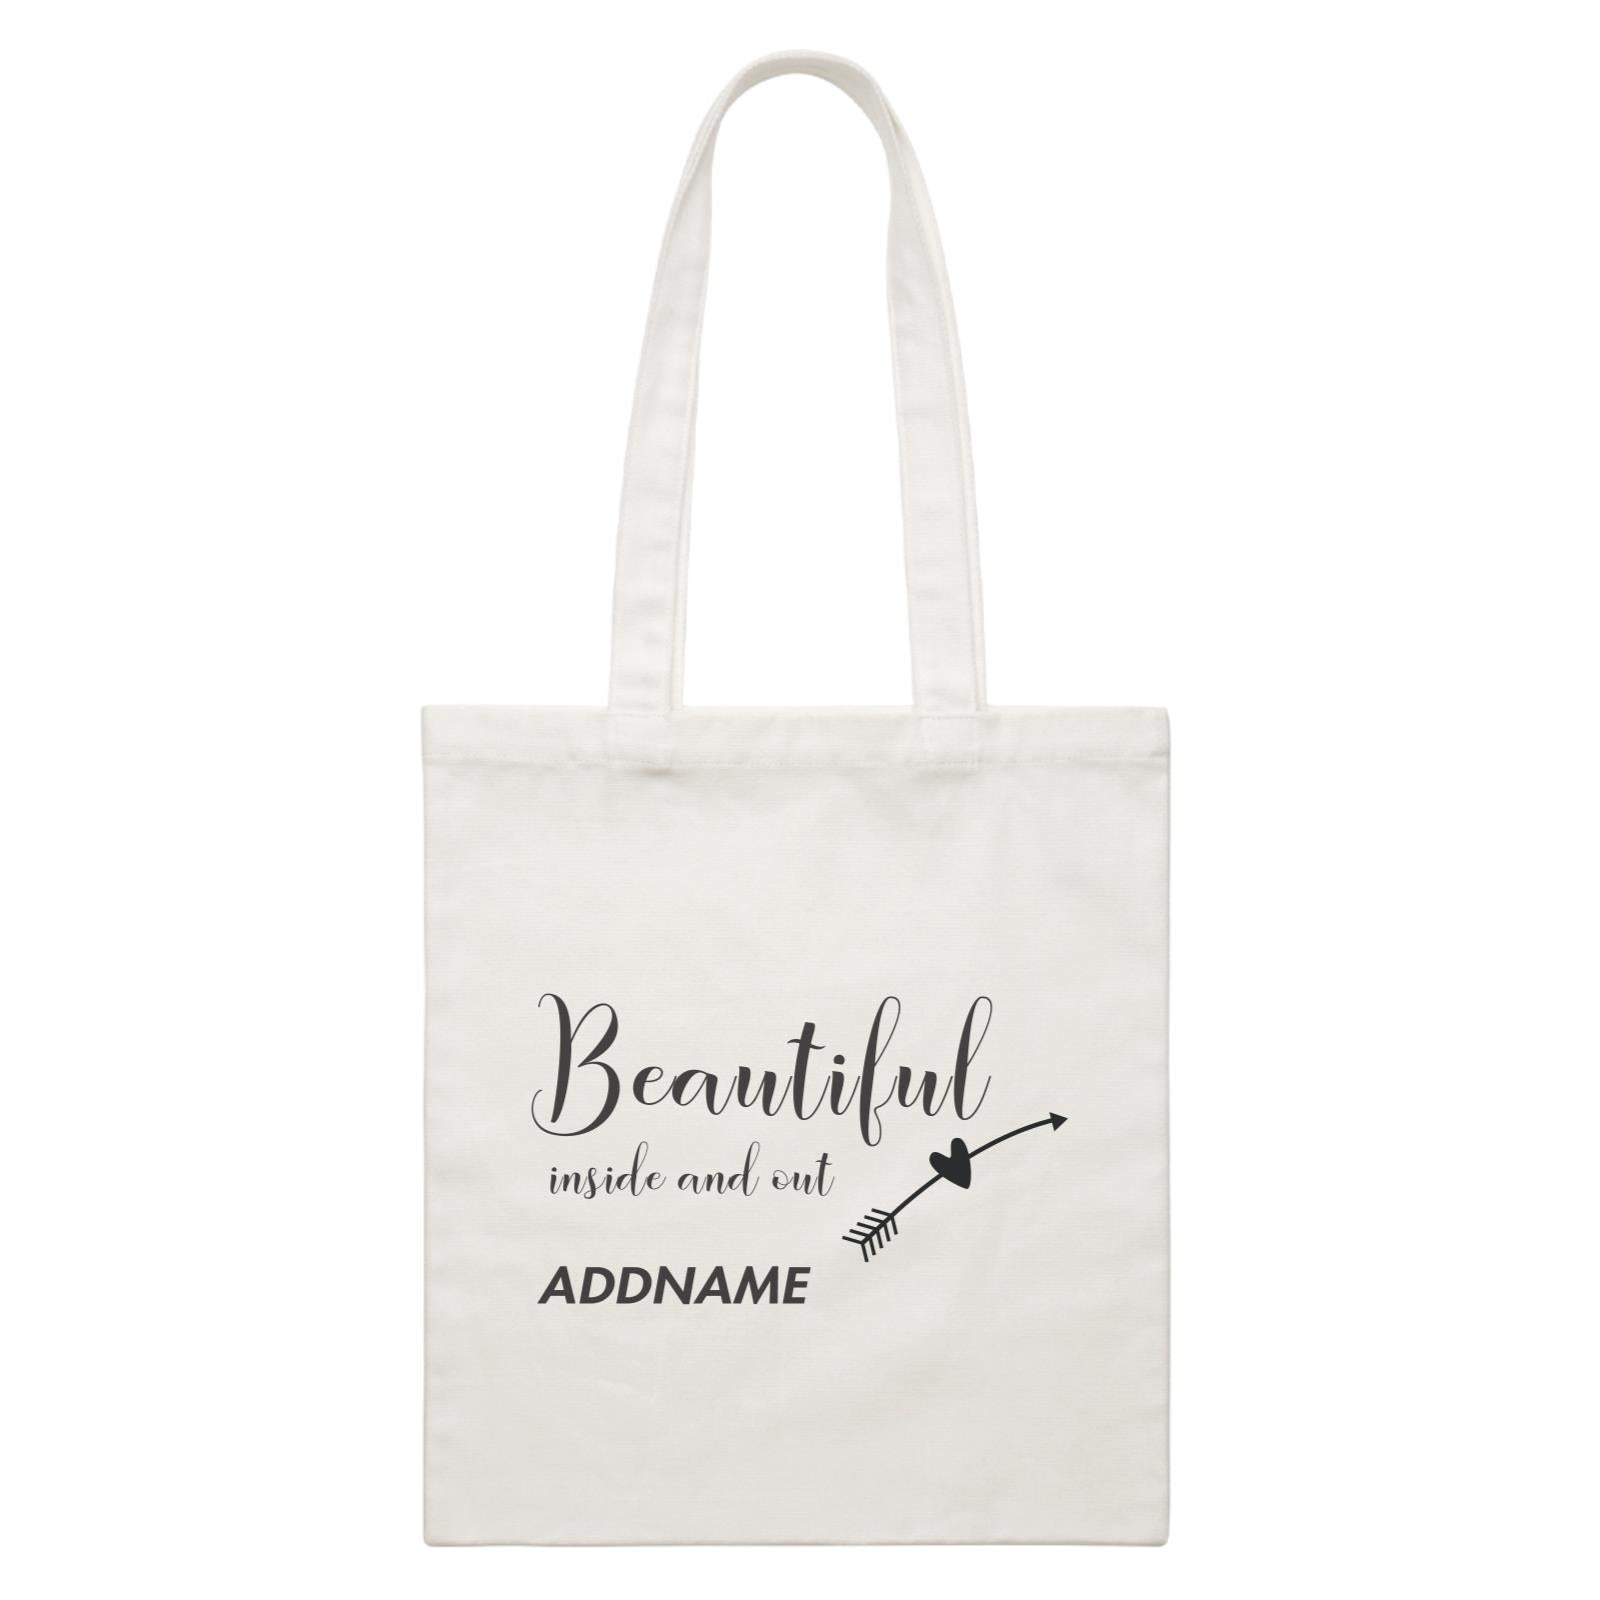 Make Up Quotes Beautiful Inside And Out Addname White Canvas Bag